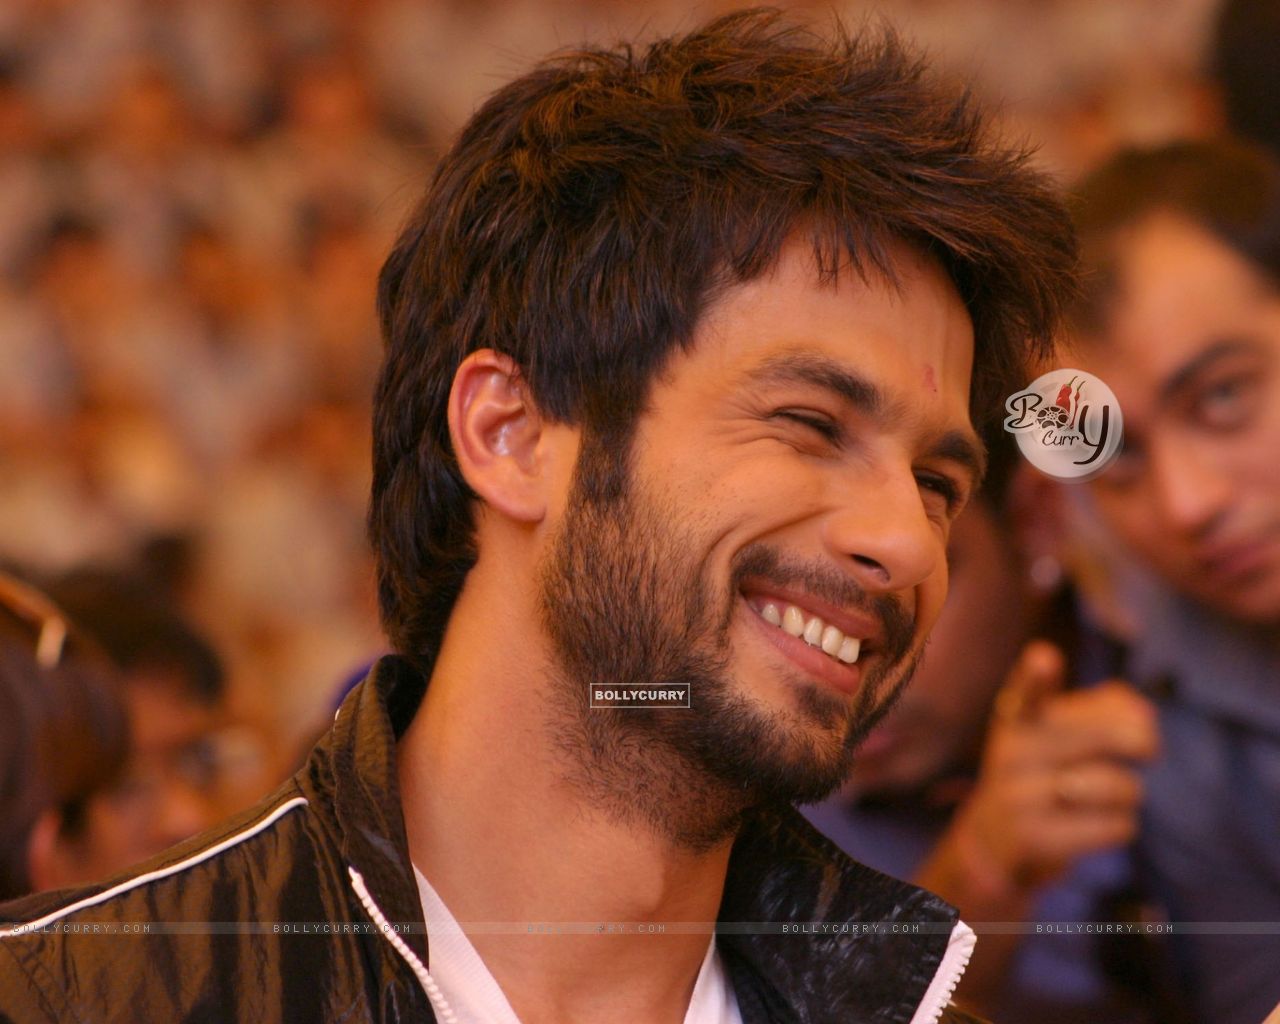 Wallpaper - Bollywood actor Shahid Kapoor visited his old school 